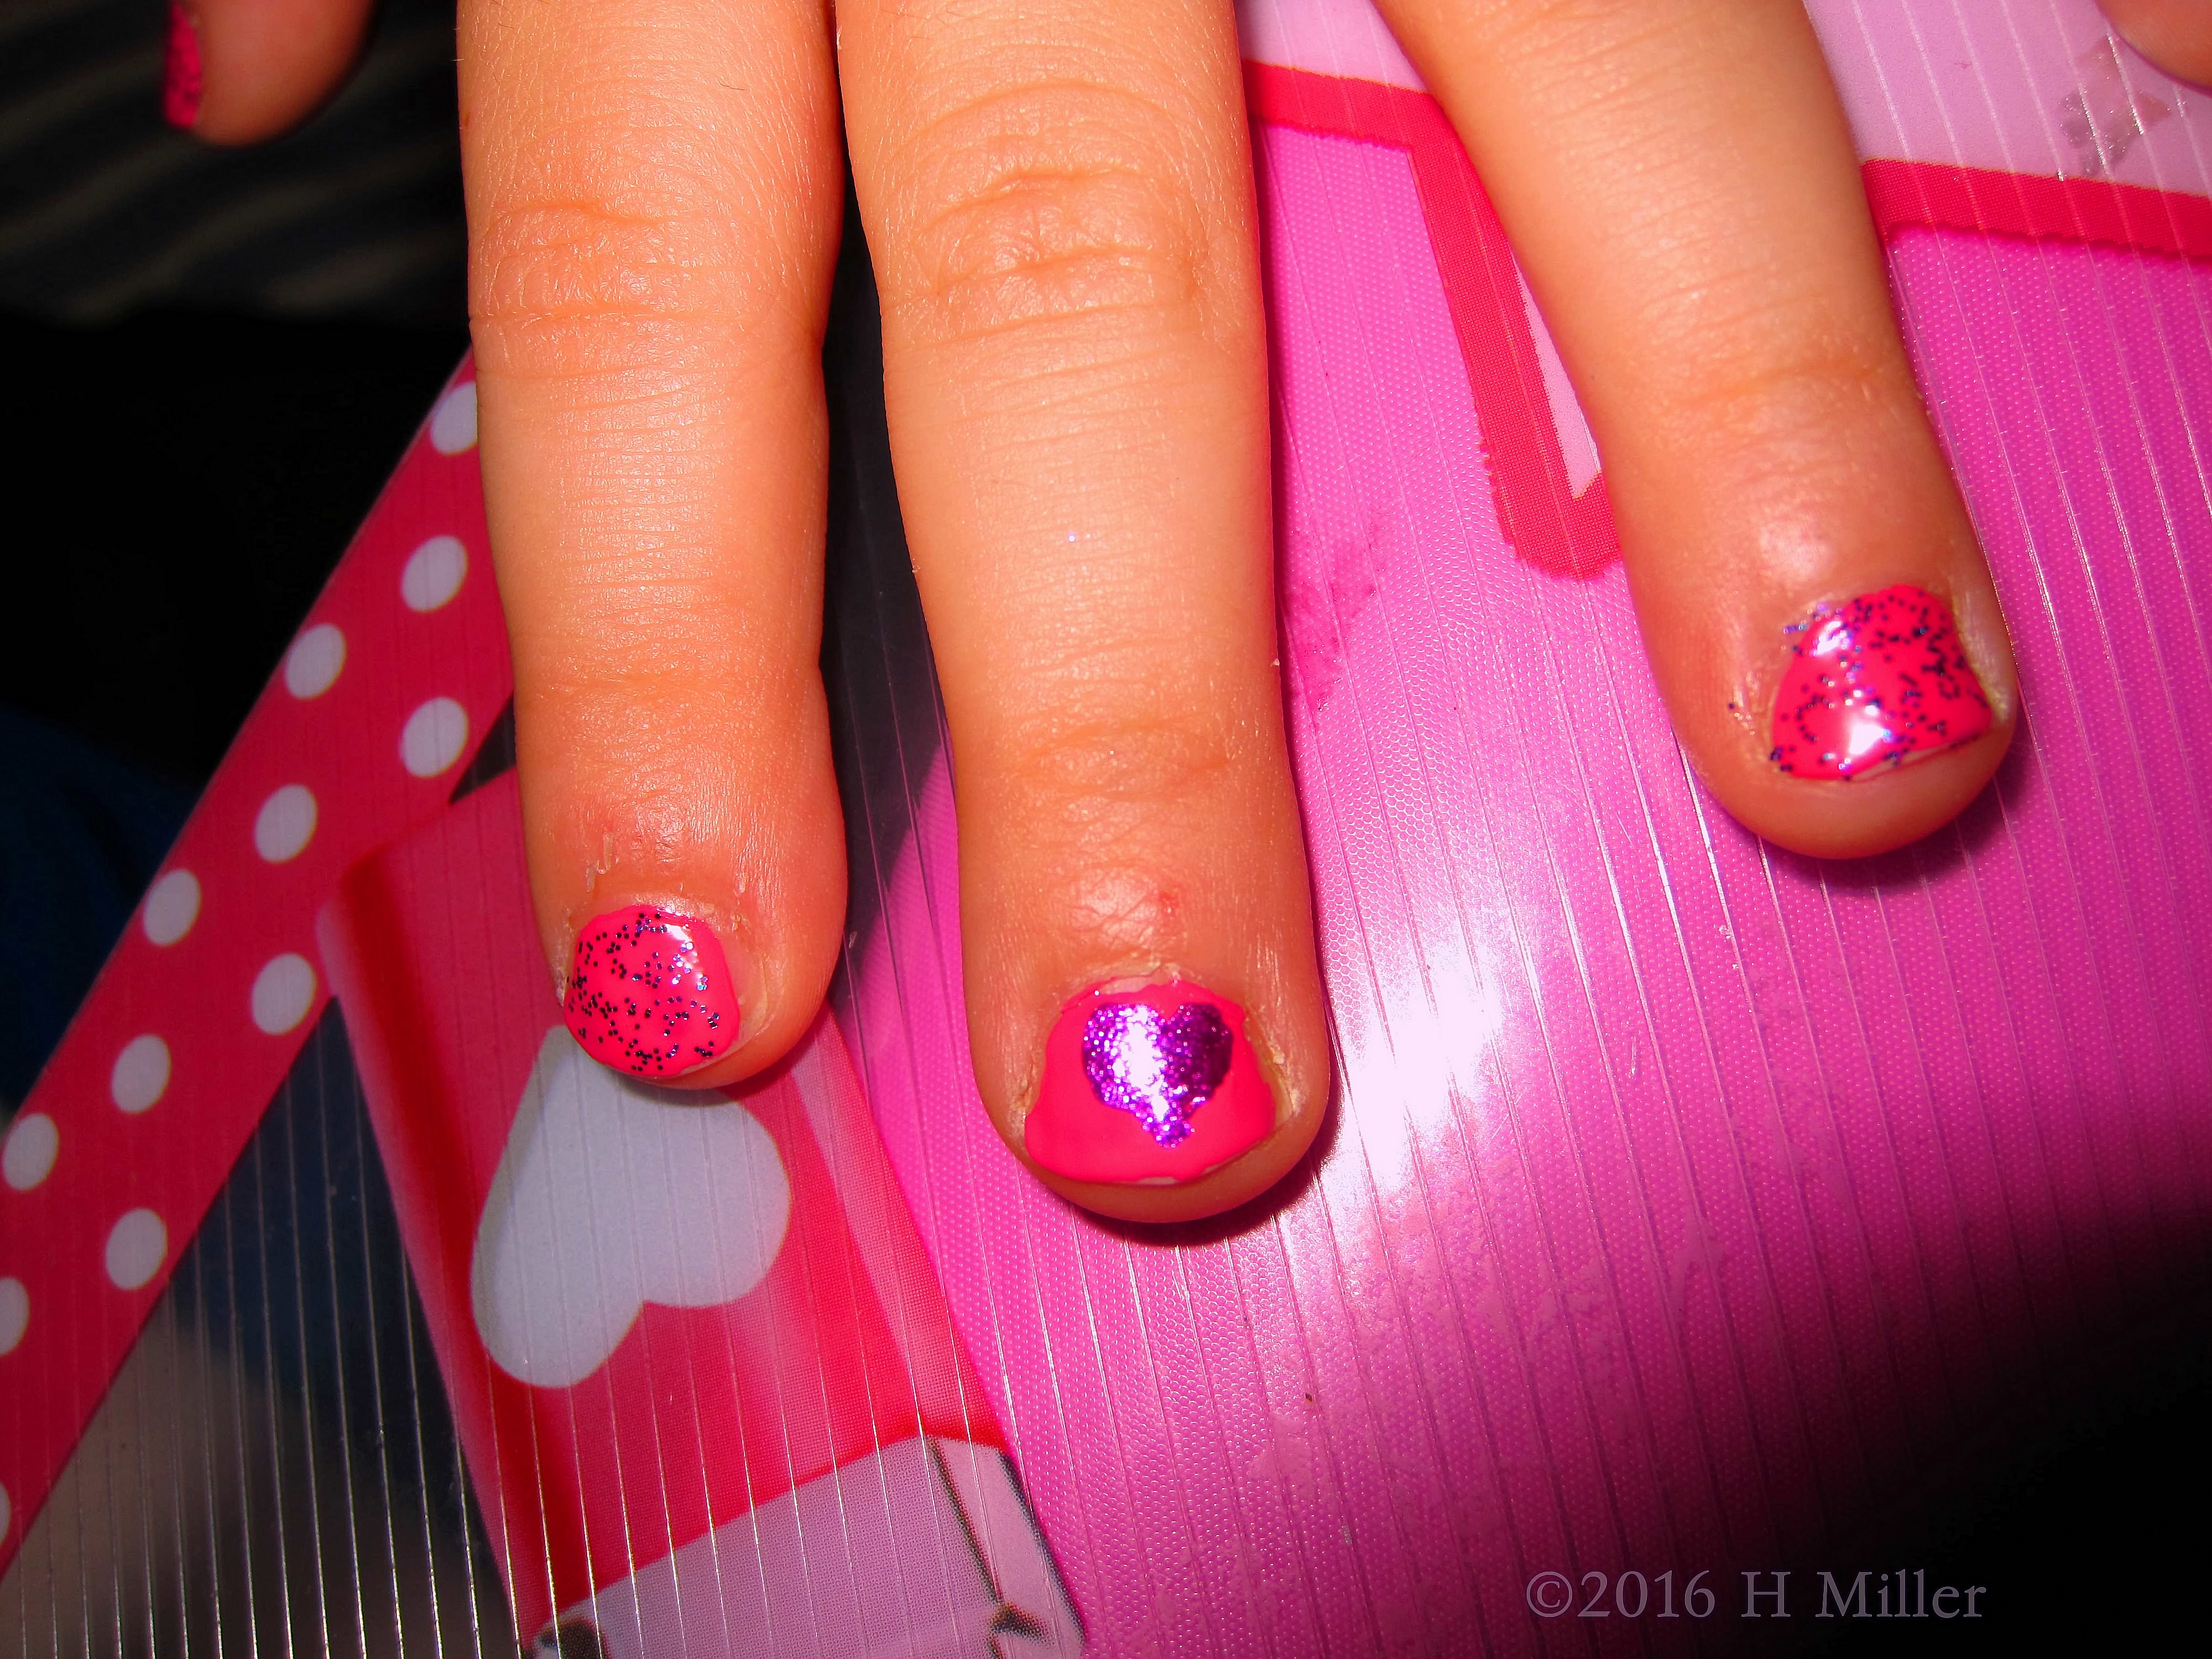 Kids Manicure With Nail Design Of A Purple Heart On A Pink Background